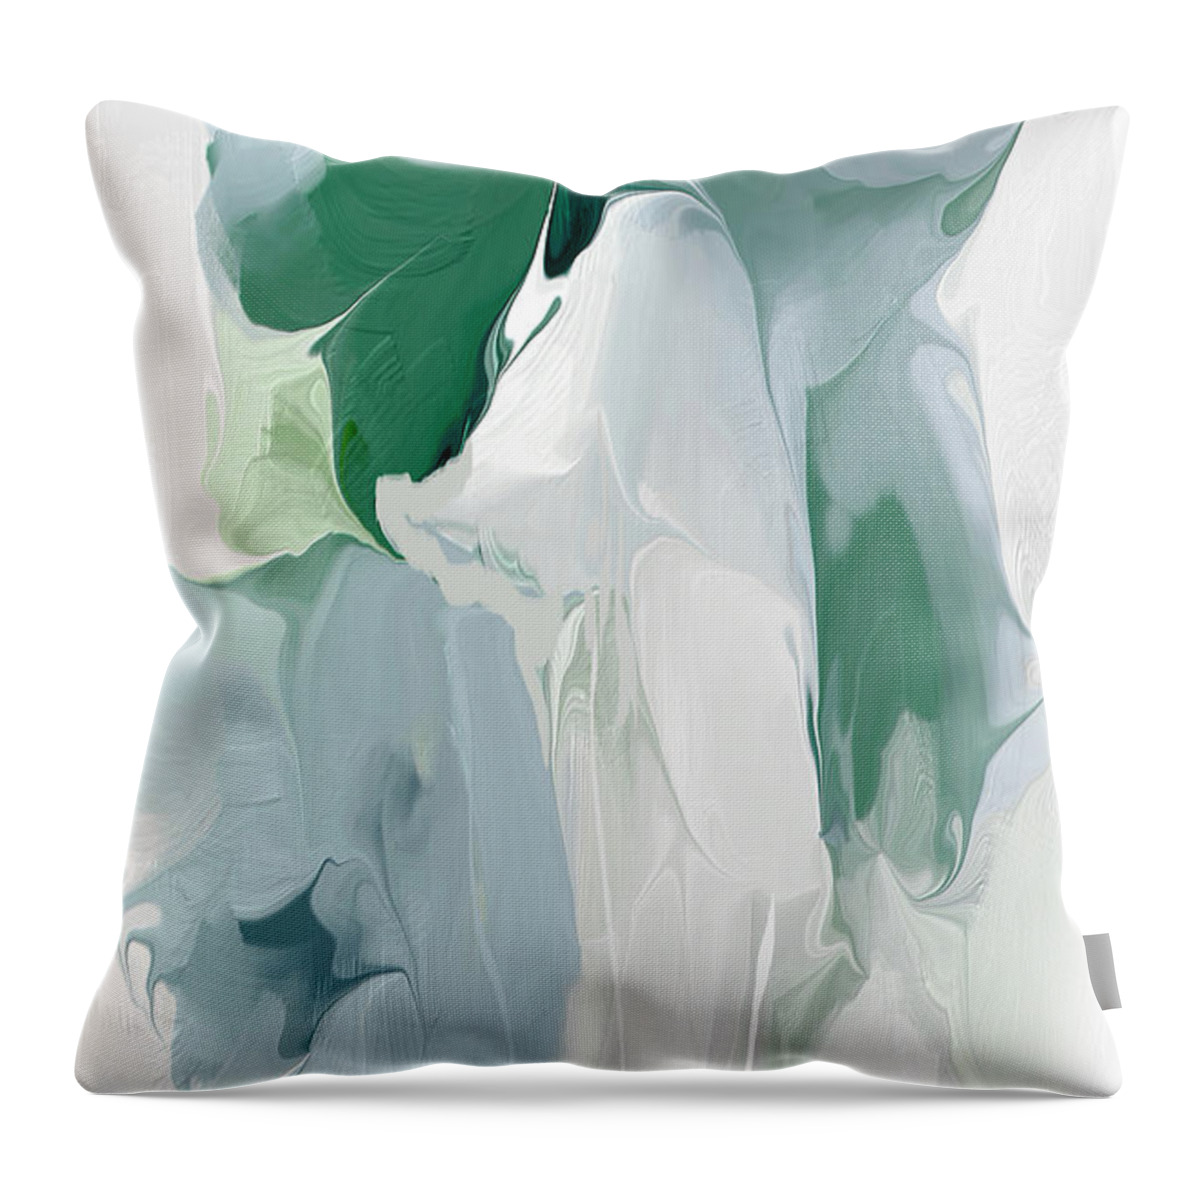  Throw Pillow featuring the digital art Greepeace Lilly 2 by Davina Nicholas